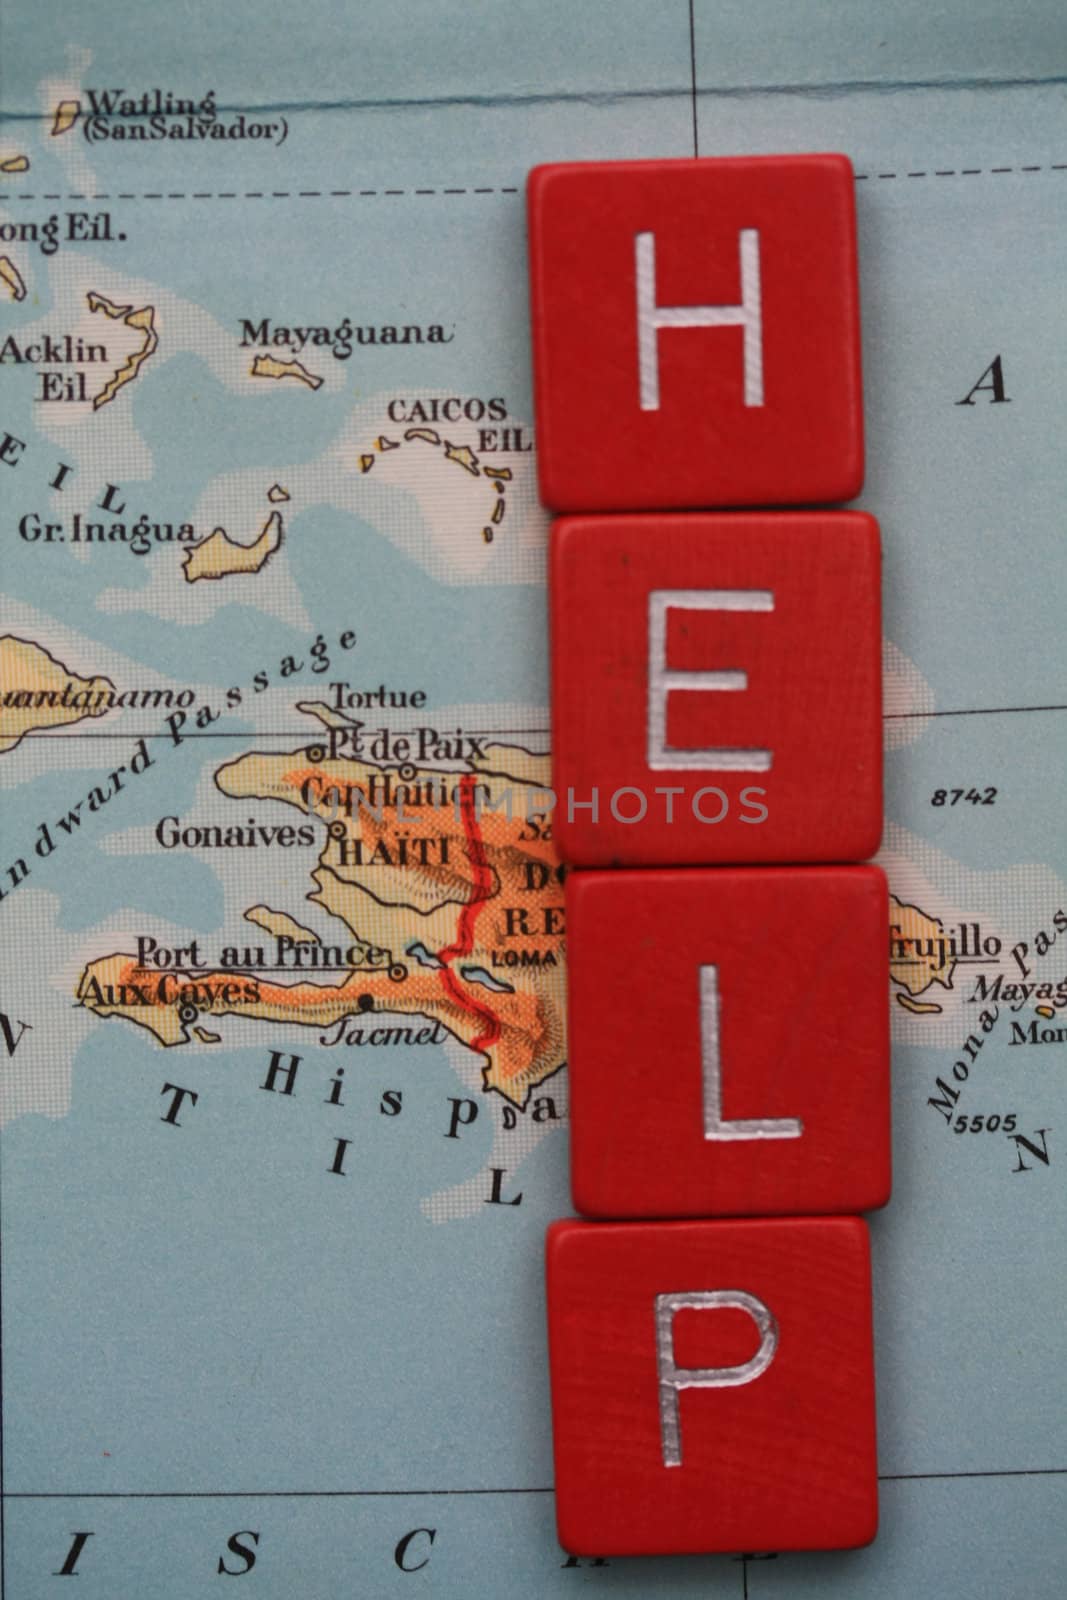 the word help over a vintage 1956 map of Haiti, donation concept